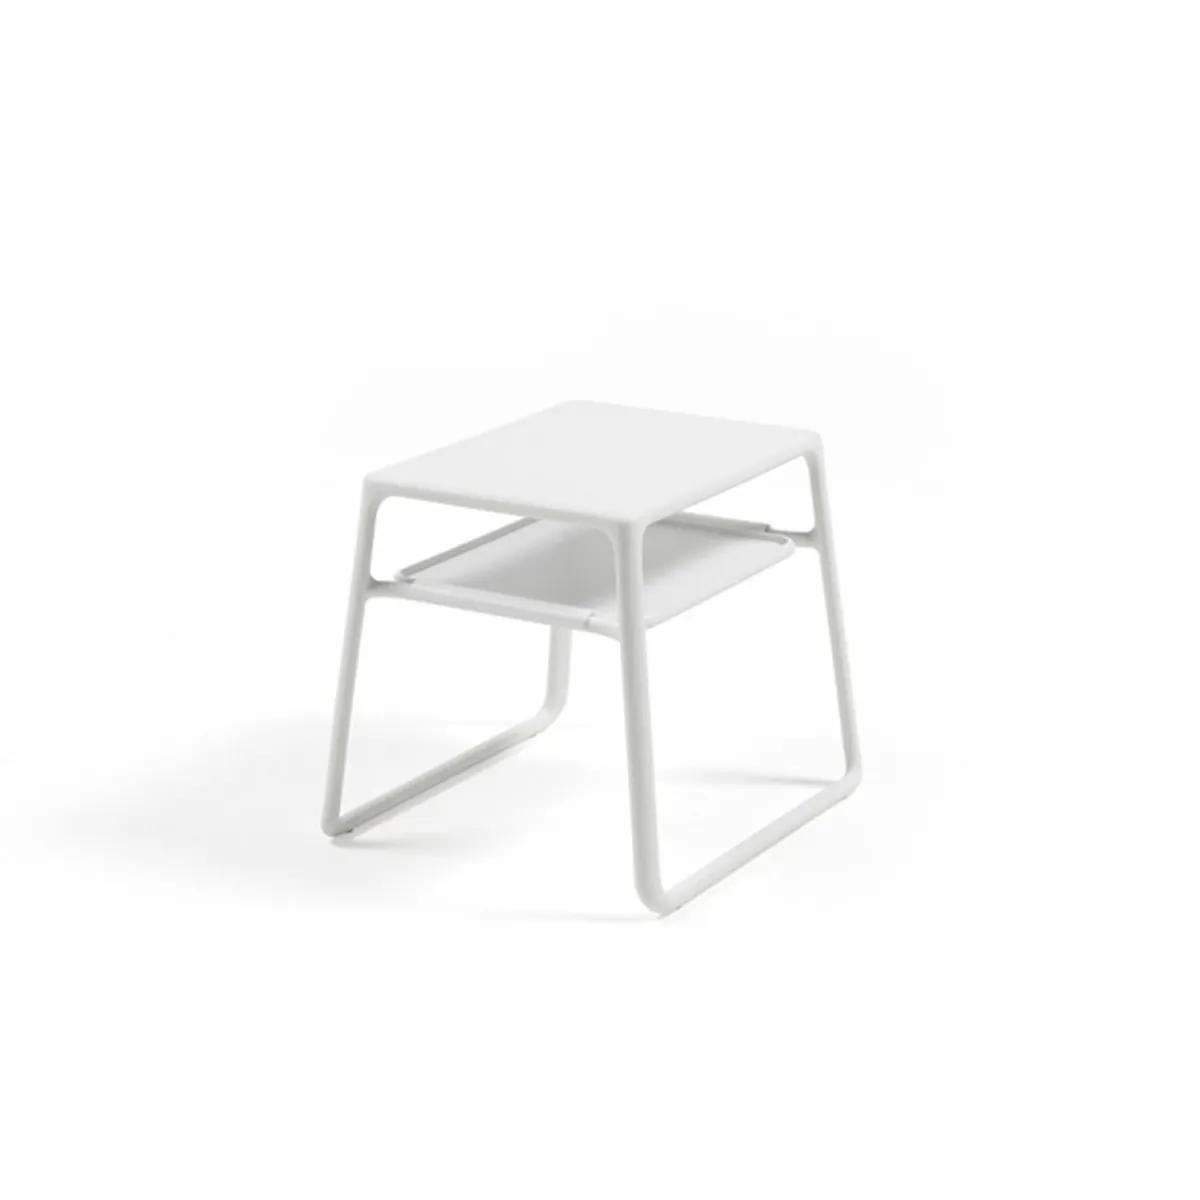 Pop side table Inside Out Contracts2